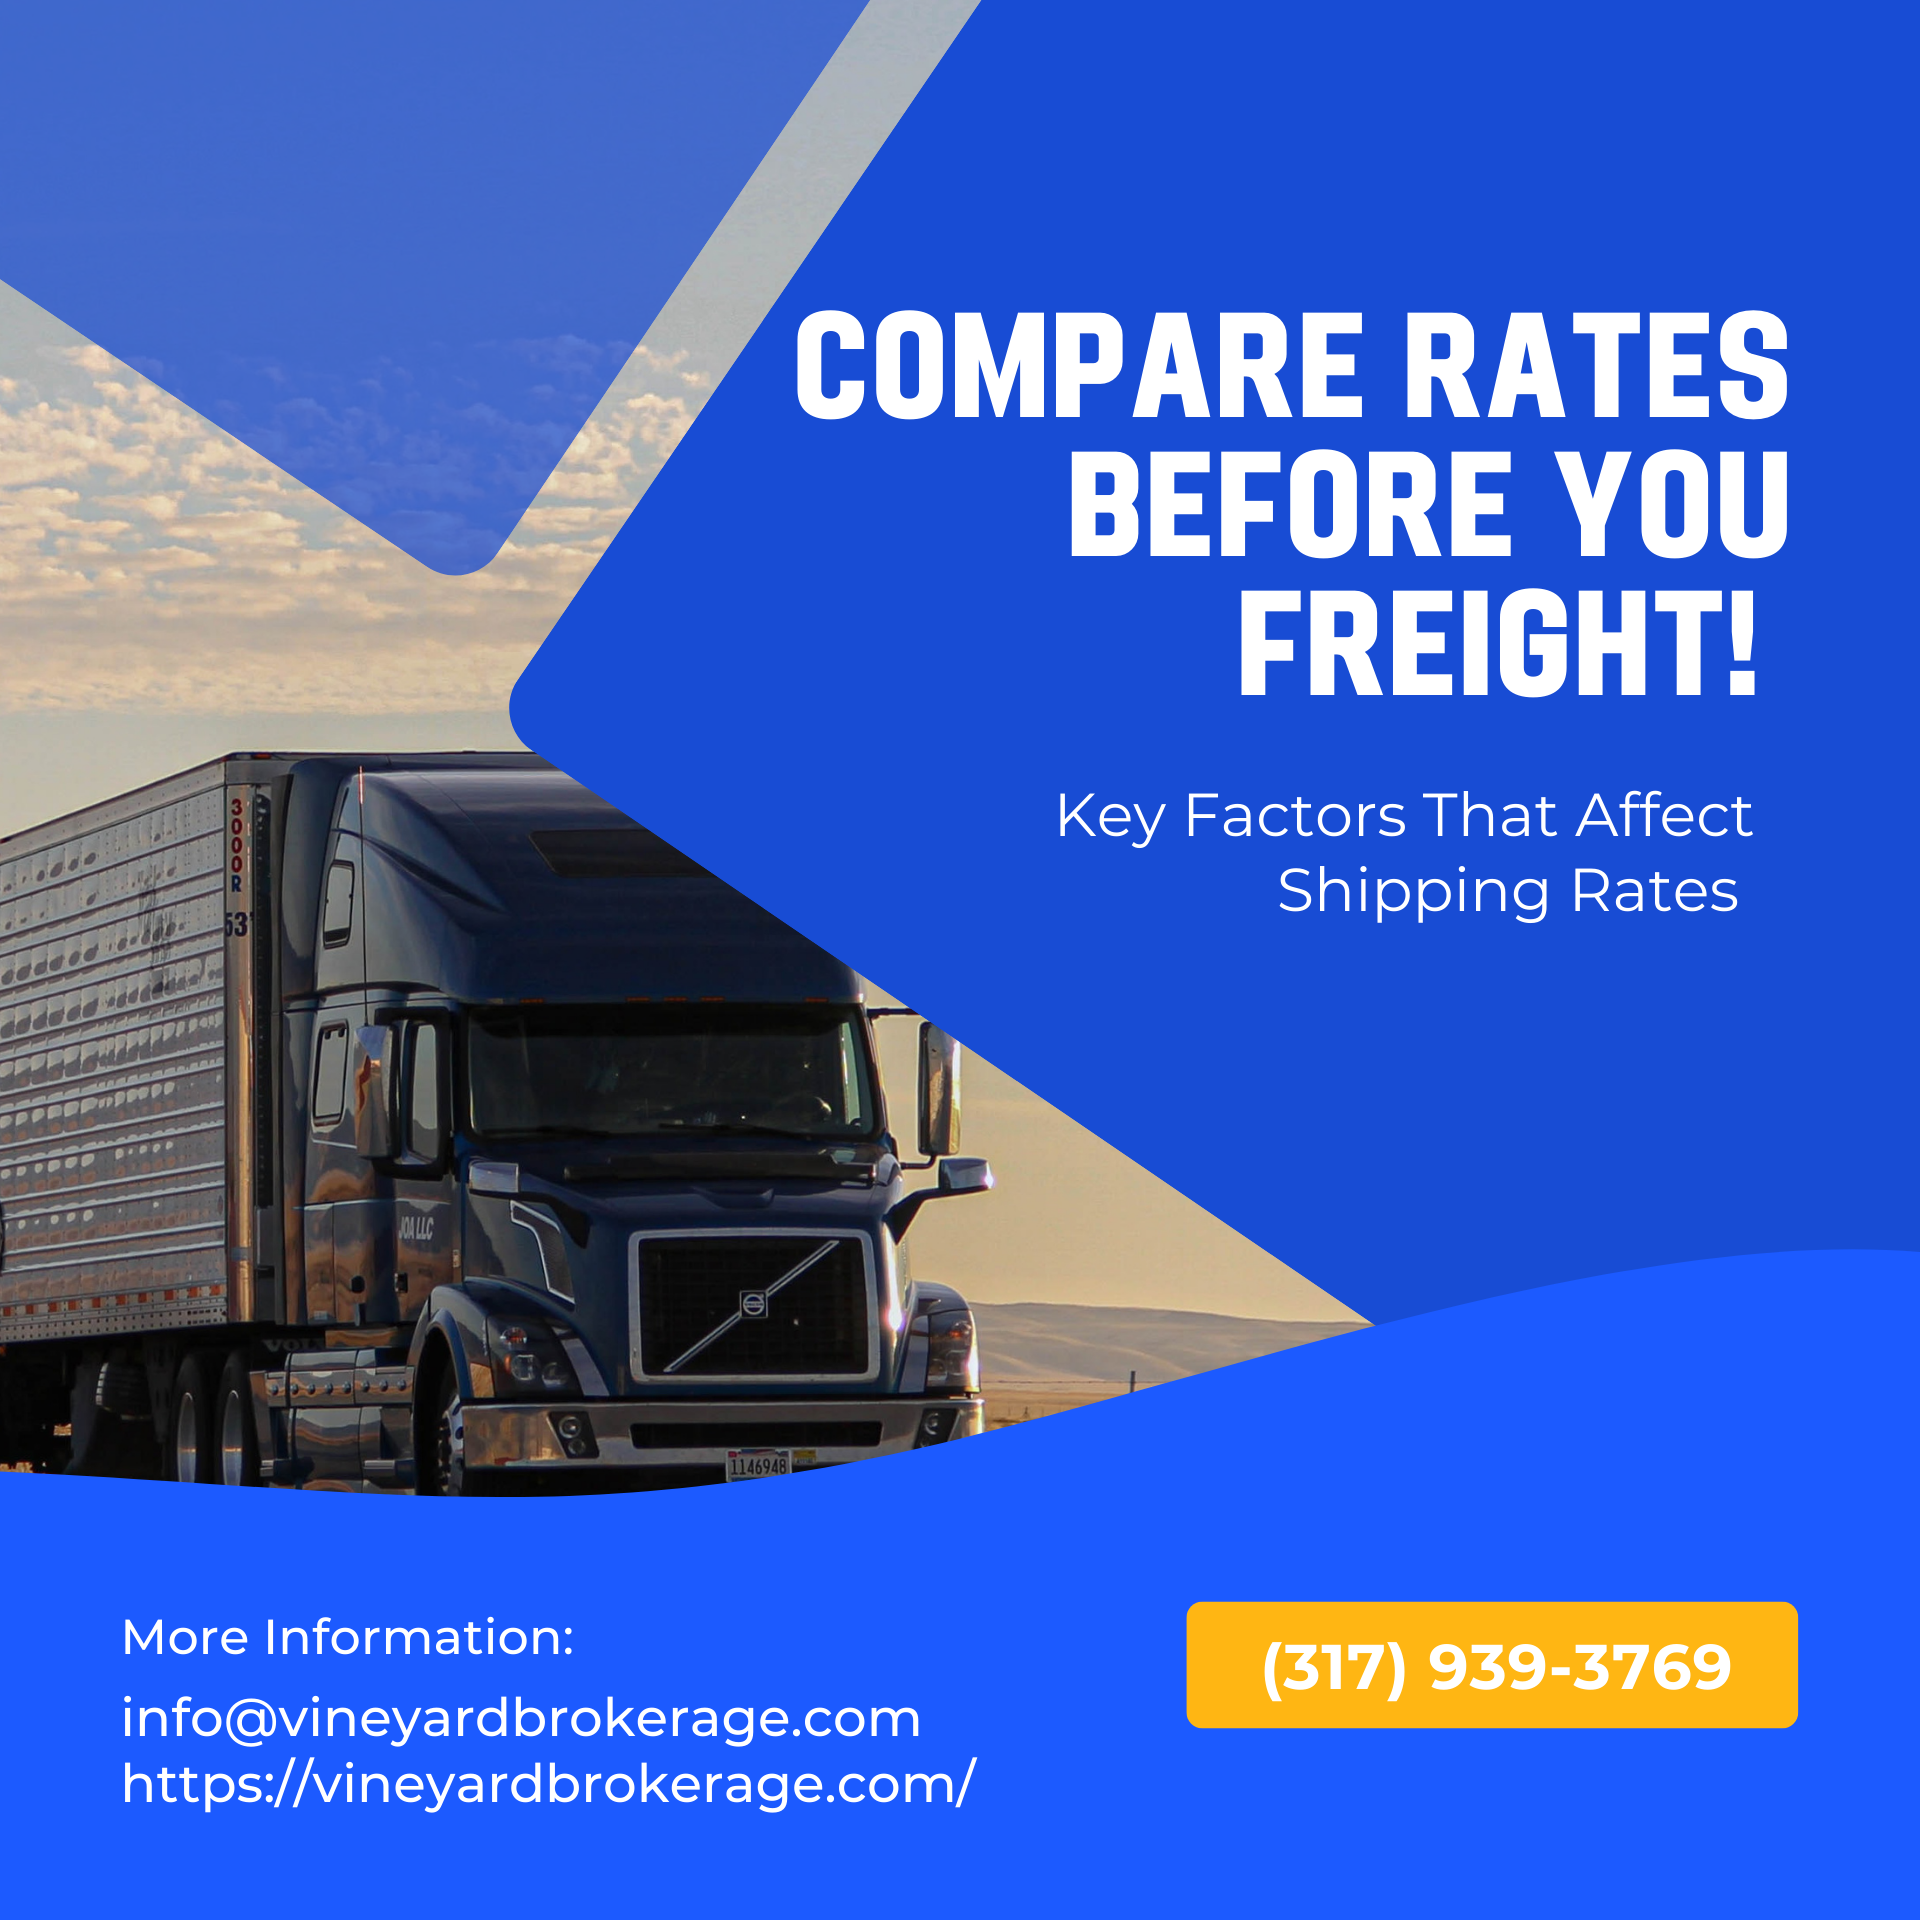 Key Factors That Affect Shipping Rates